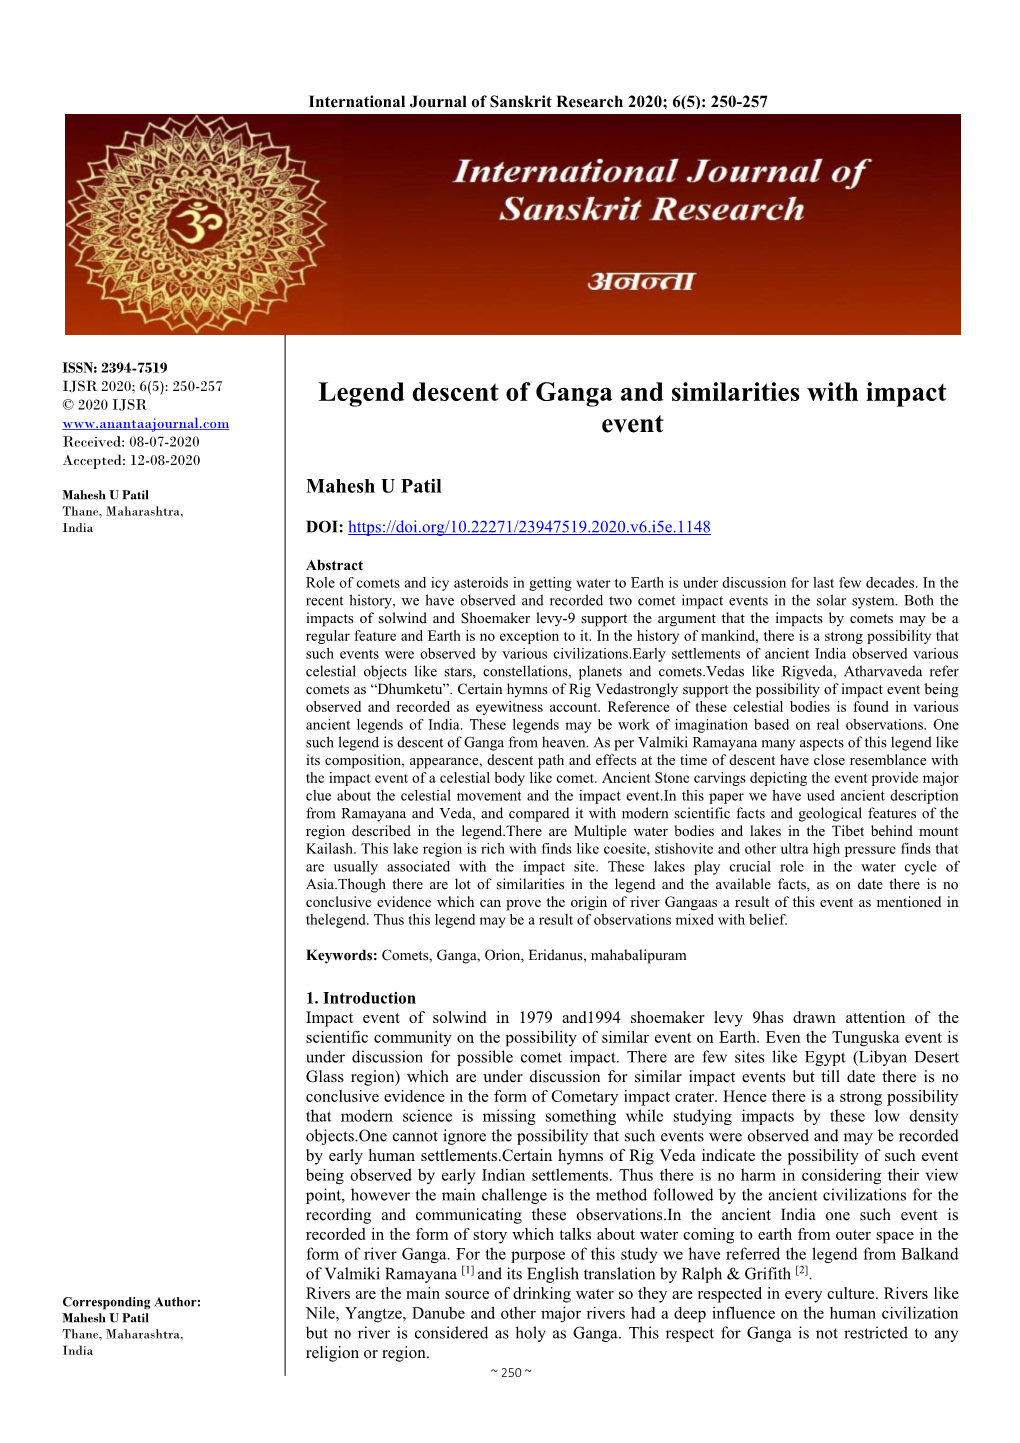 Legend Descent of Ganga and Similarities with Impact Event